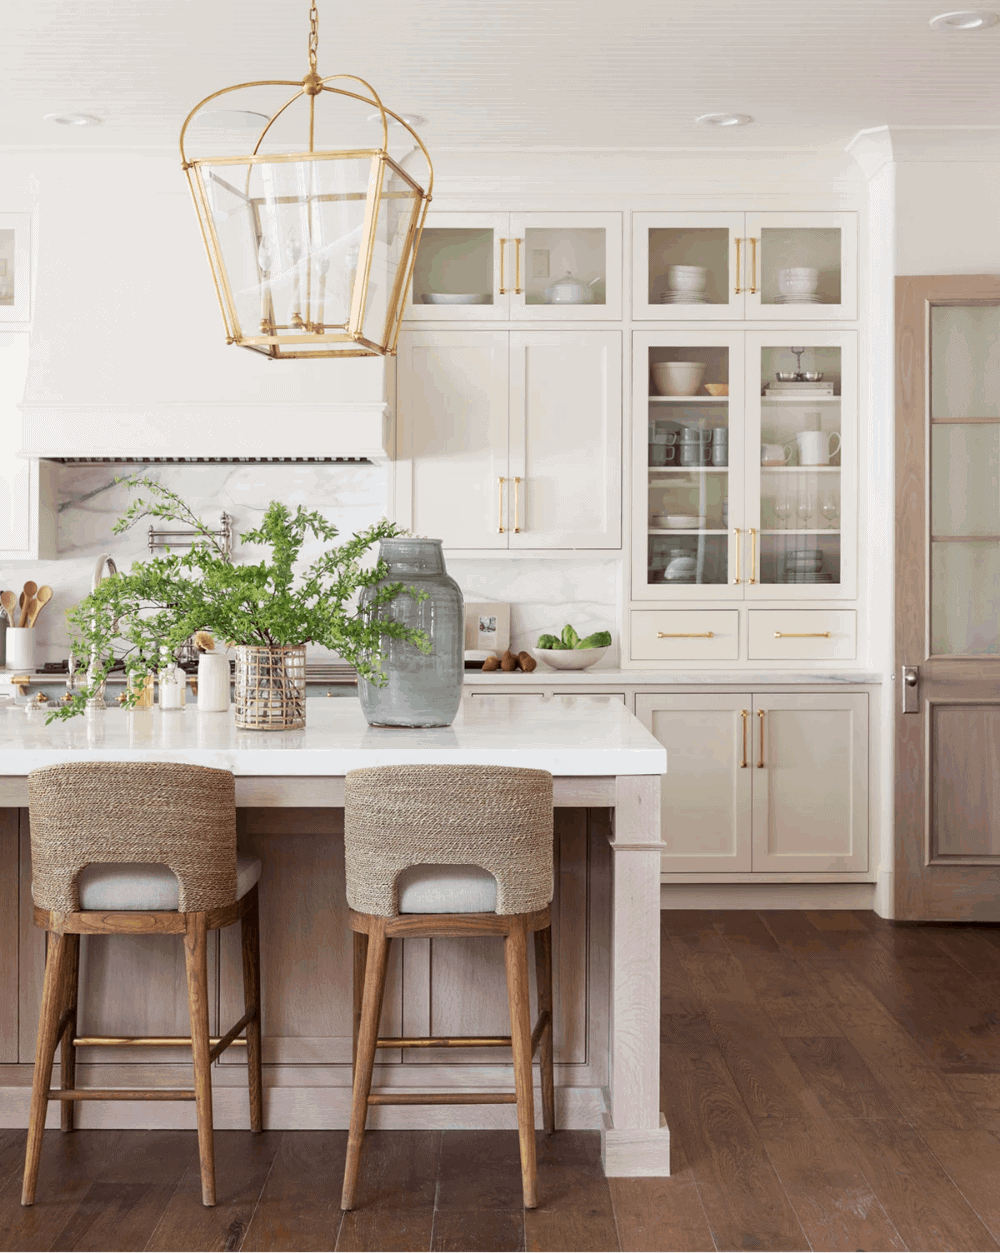 A warm white kitchen painted in Benjamin Moore Swiss Coffee paint color, with a gold lantern above the island.